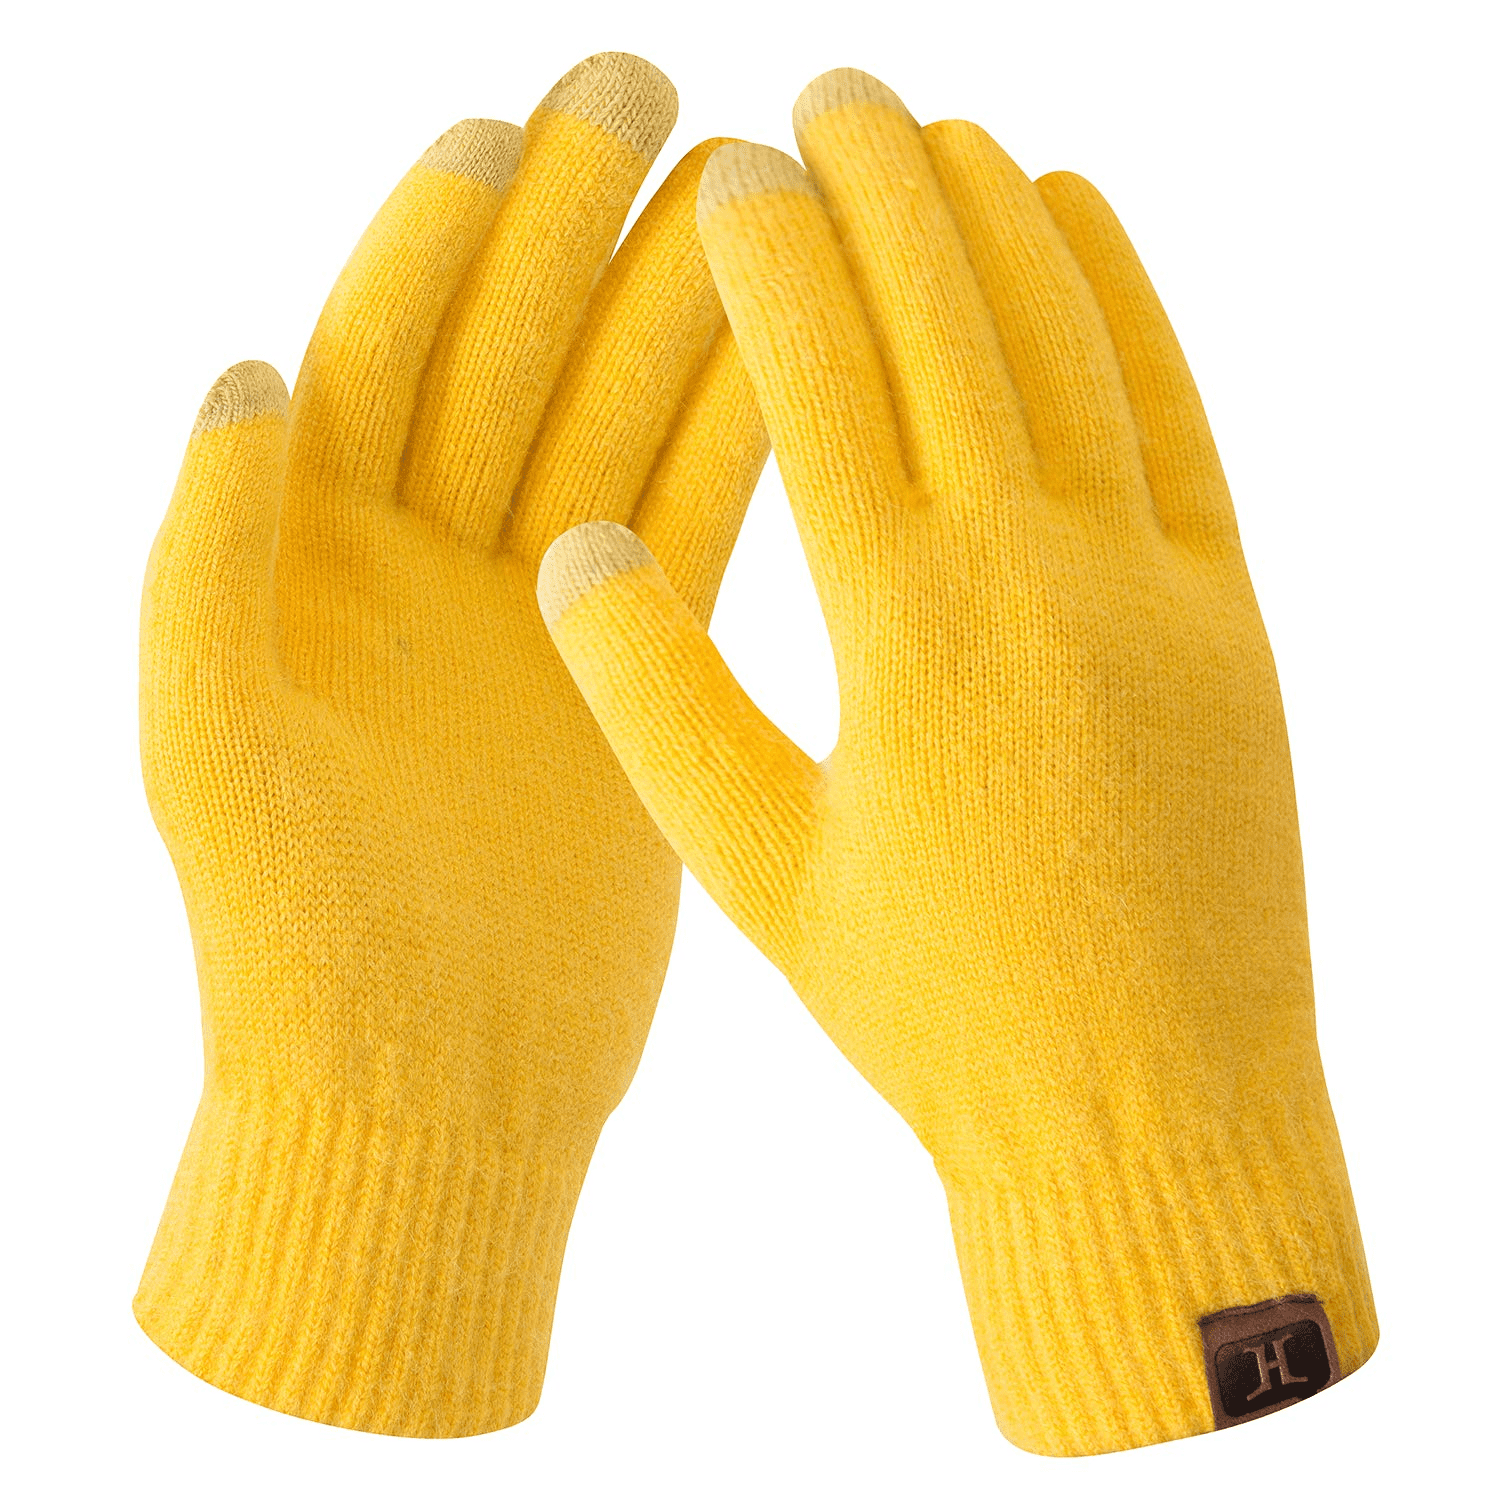 Women Winter Touchscreen Stretch Thermal Magic Gloves Warm Wool Knitted  Thick Fleece Lined,Yellow 